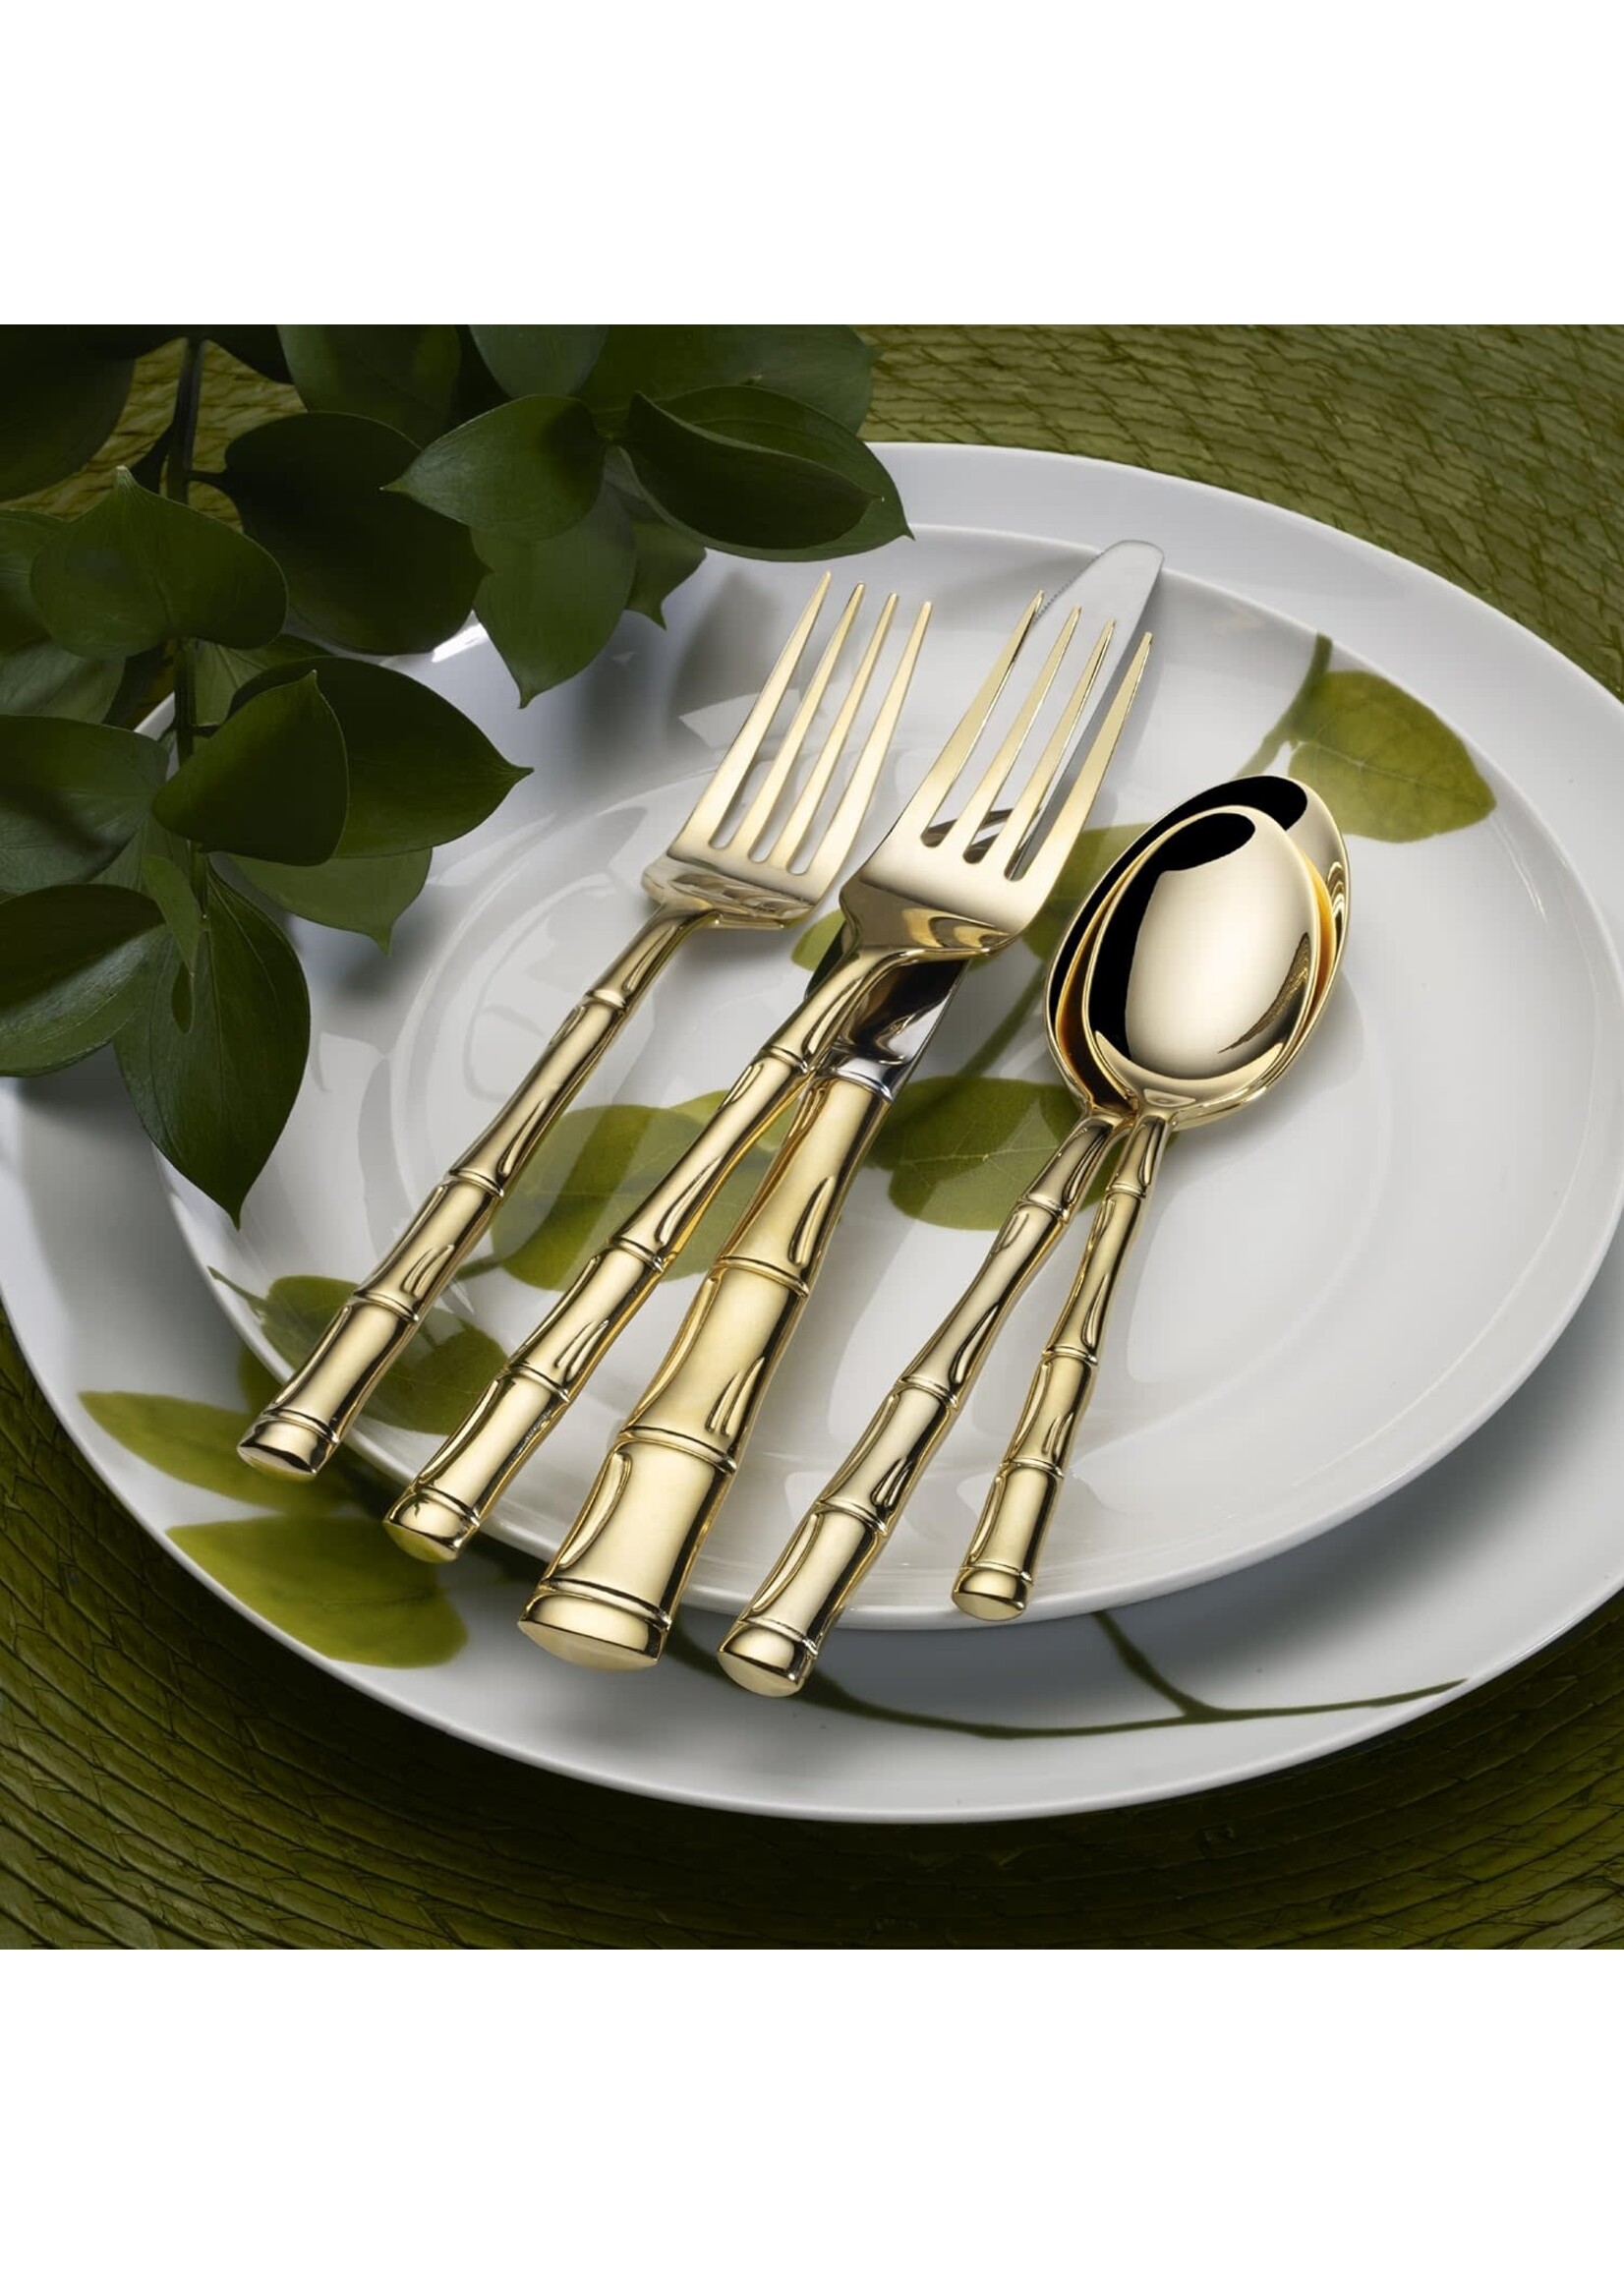 Wallace Wallace Bamboo Gold-Plated 20-Piece Set, Service for 4